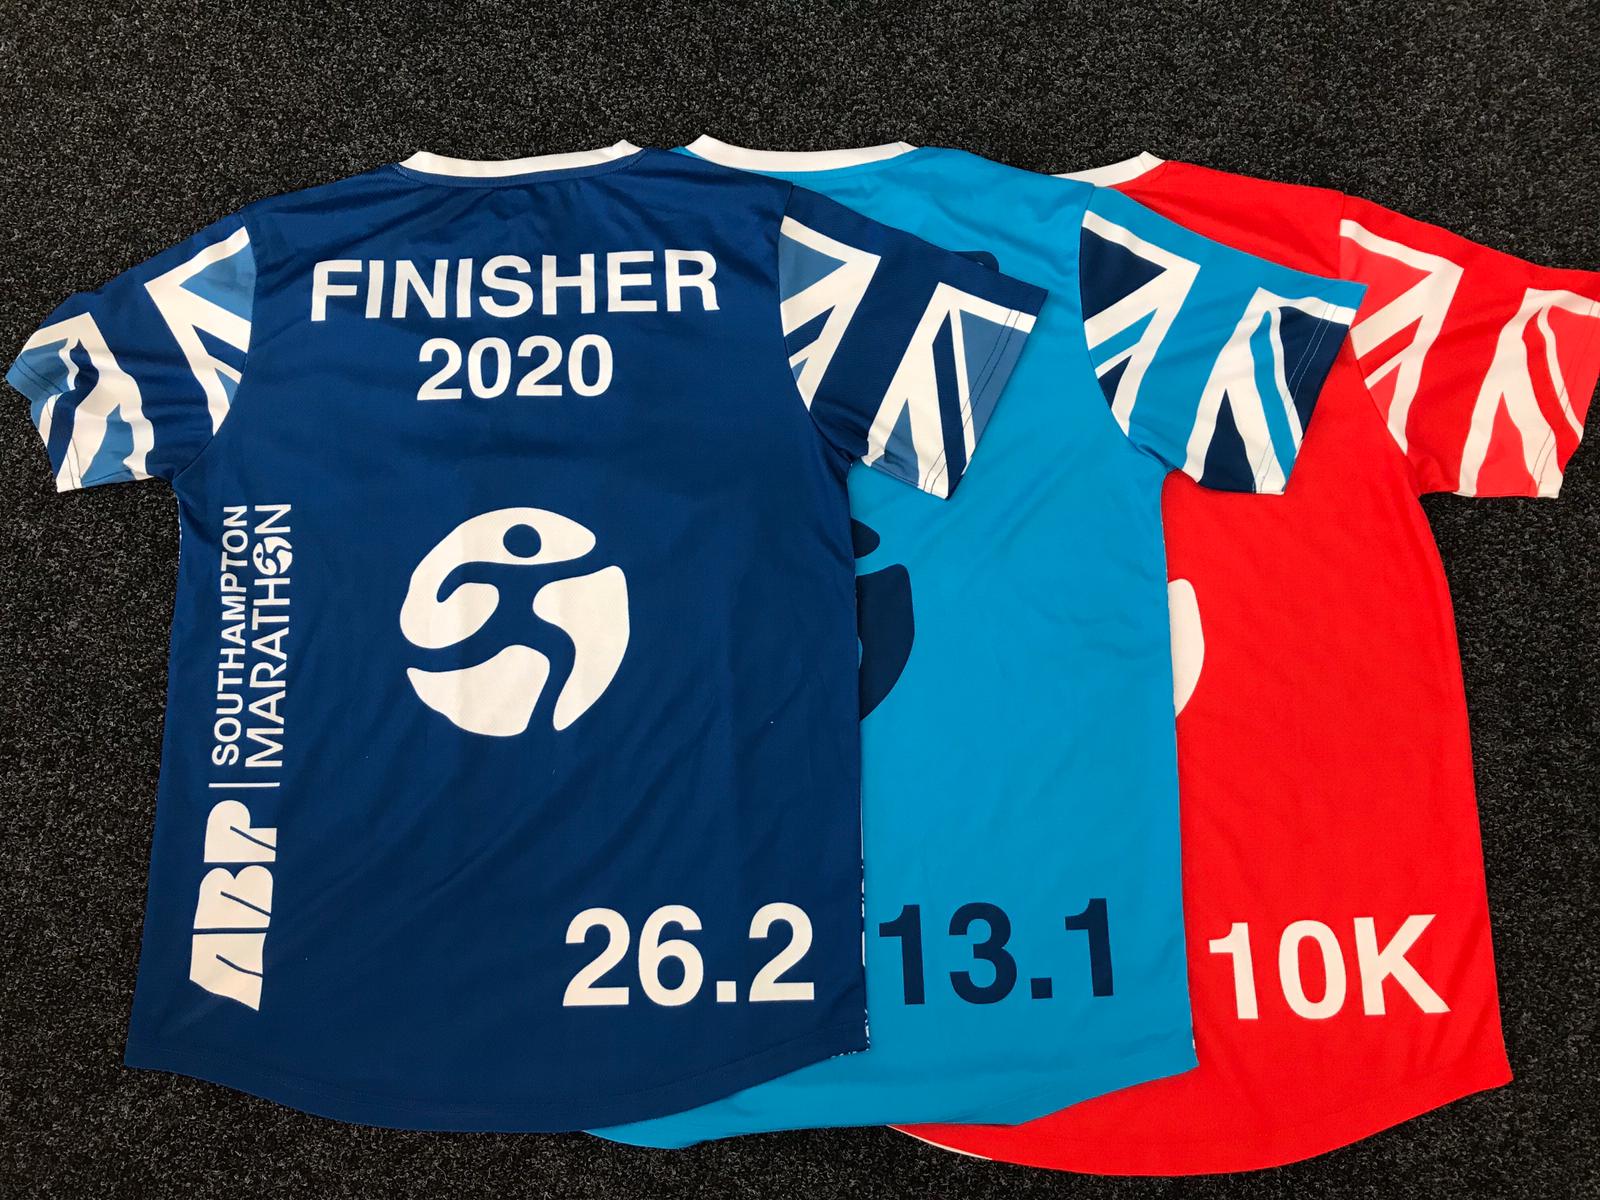 Finisher tees BIG Reveal!